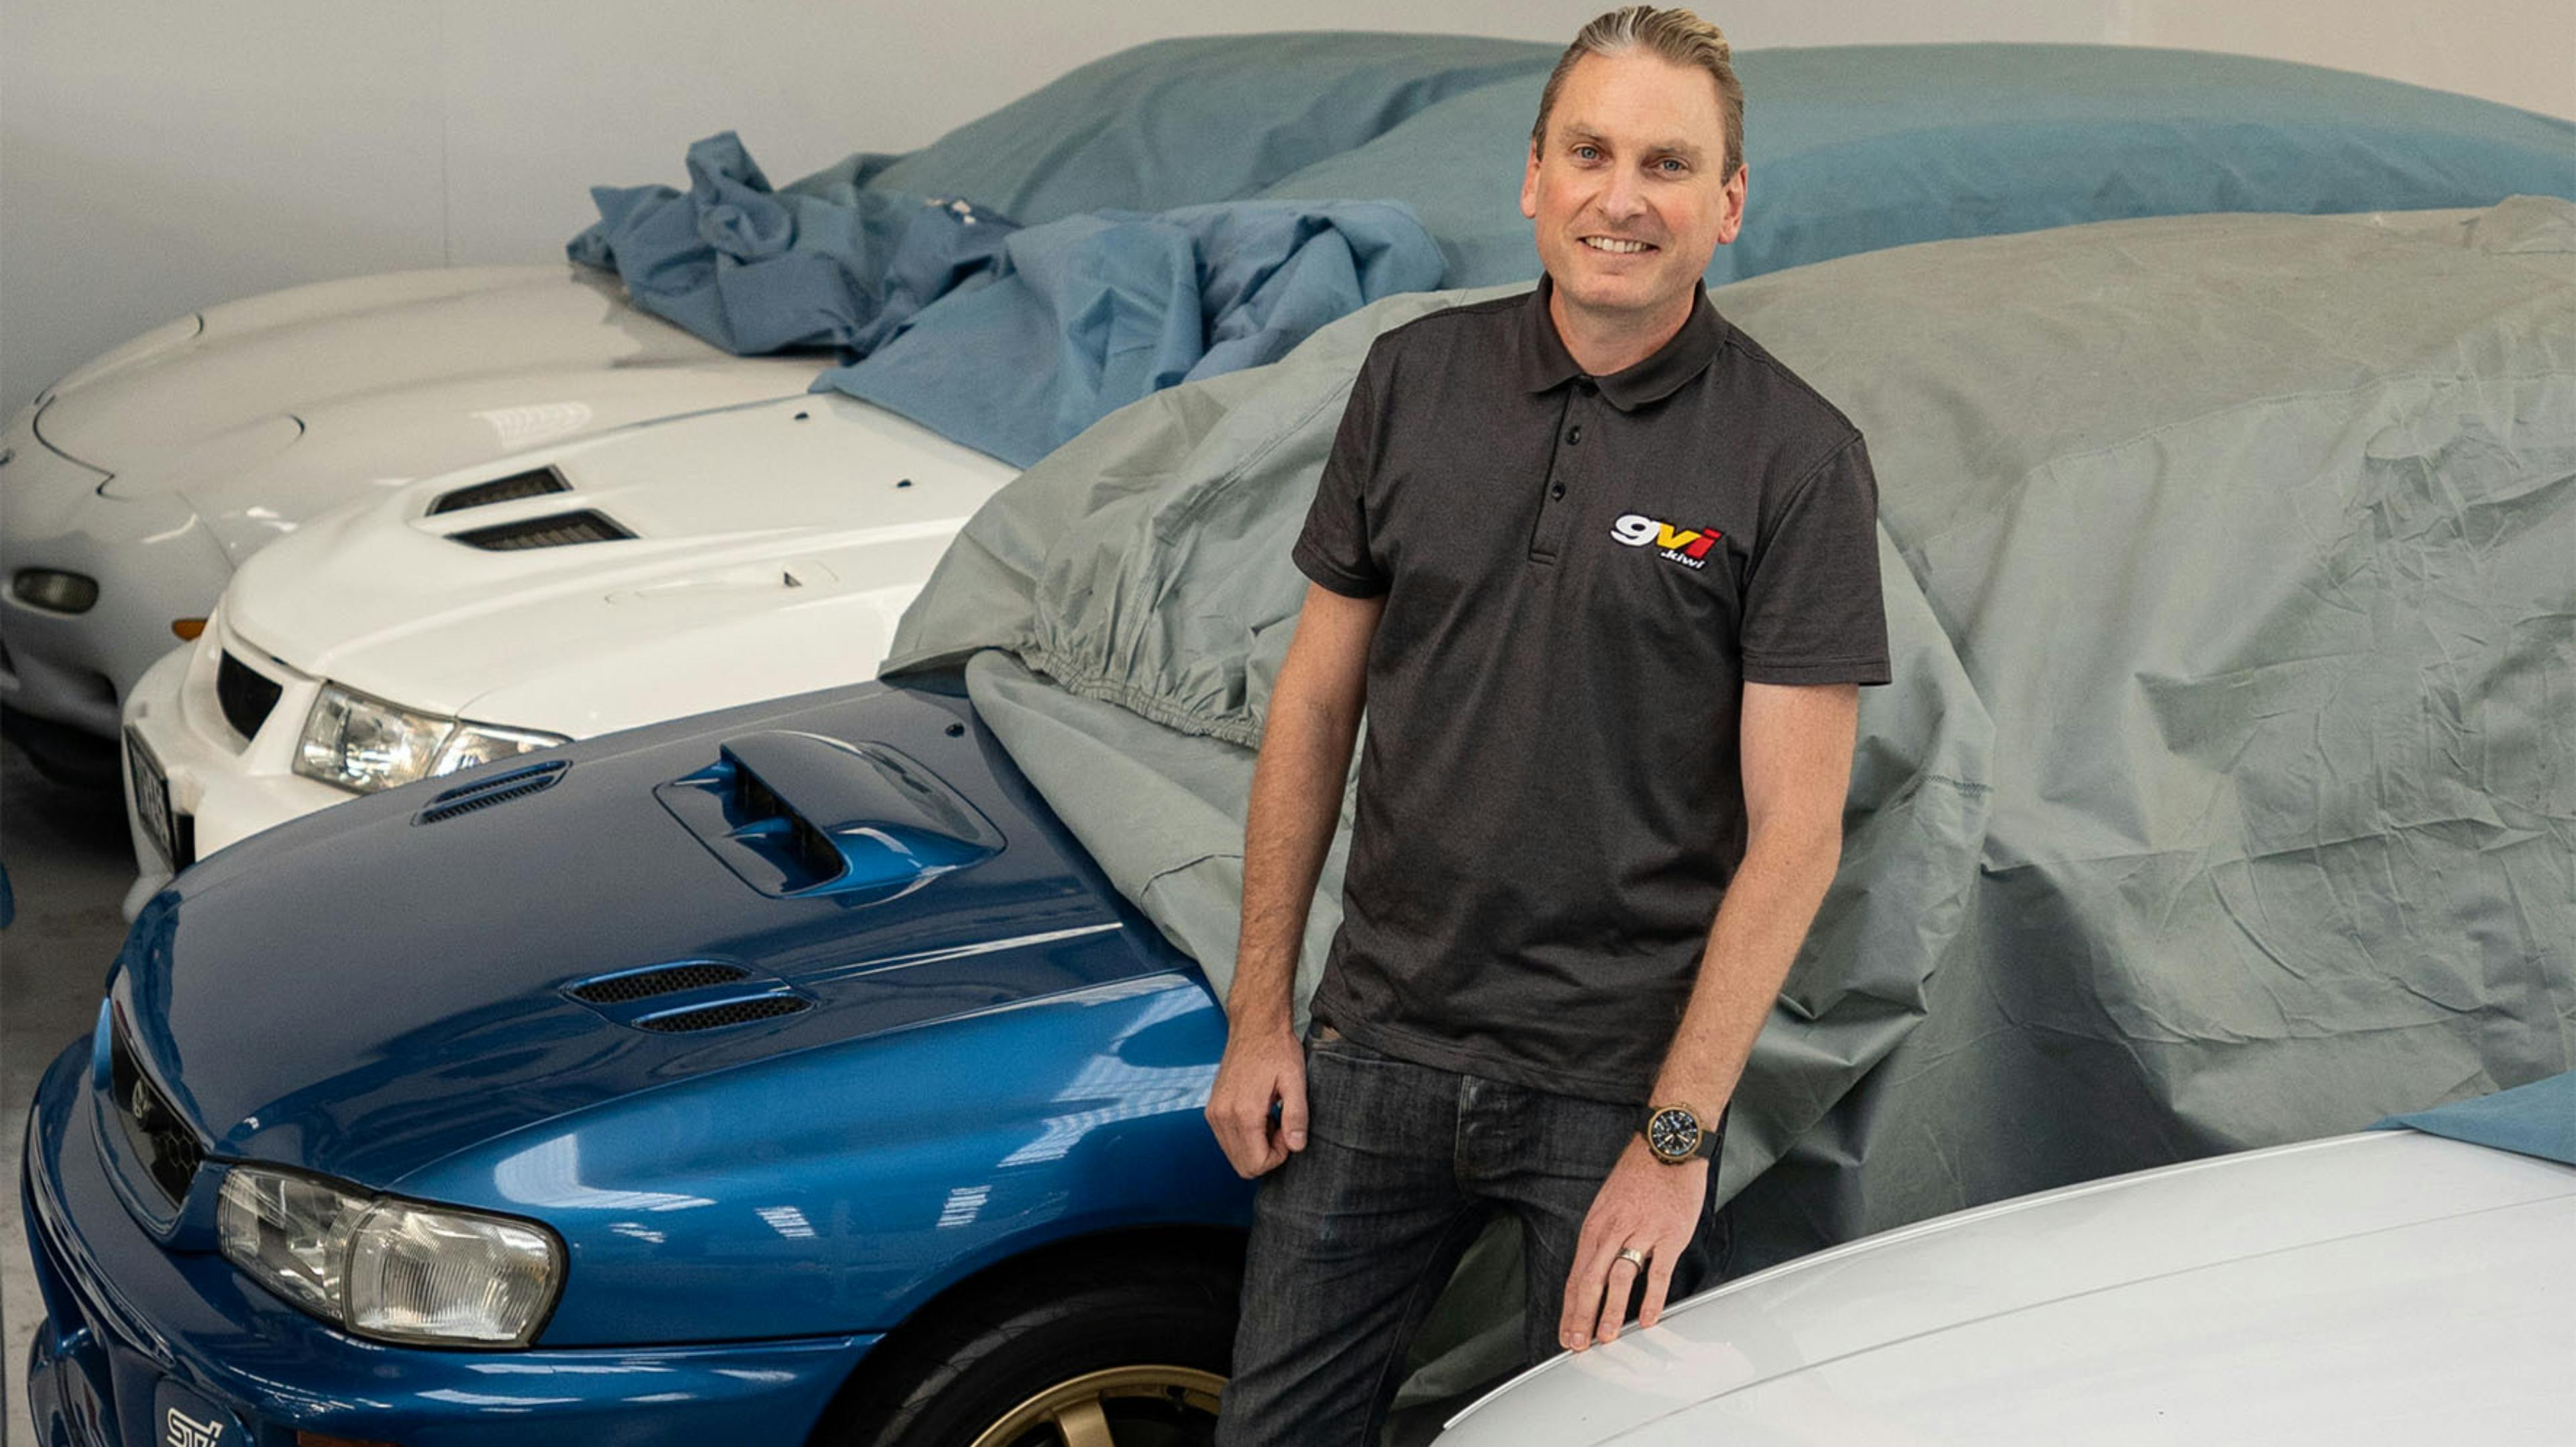 ‘My dividend is the joy of driving my classic cars’